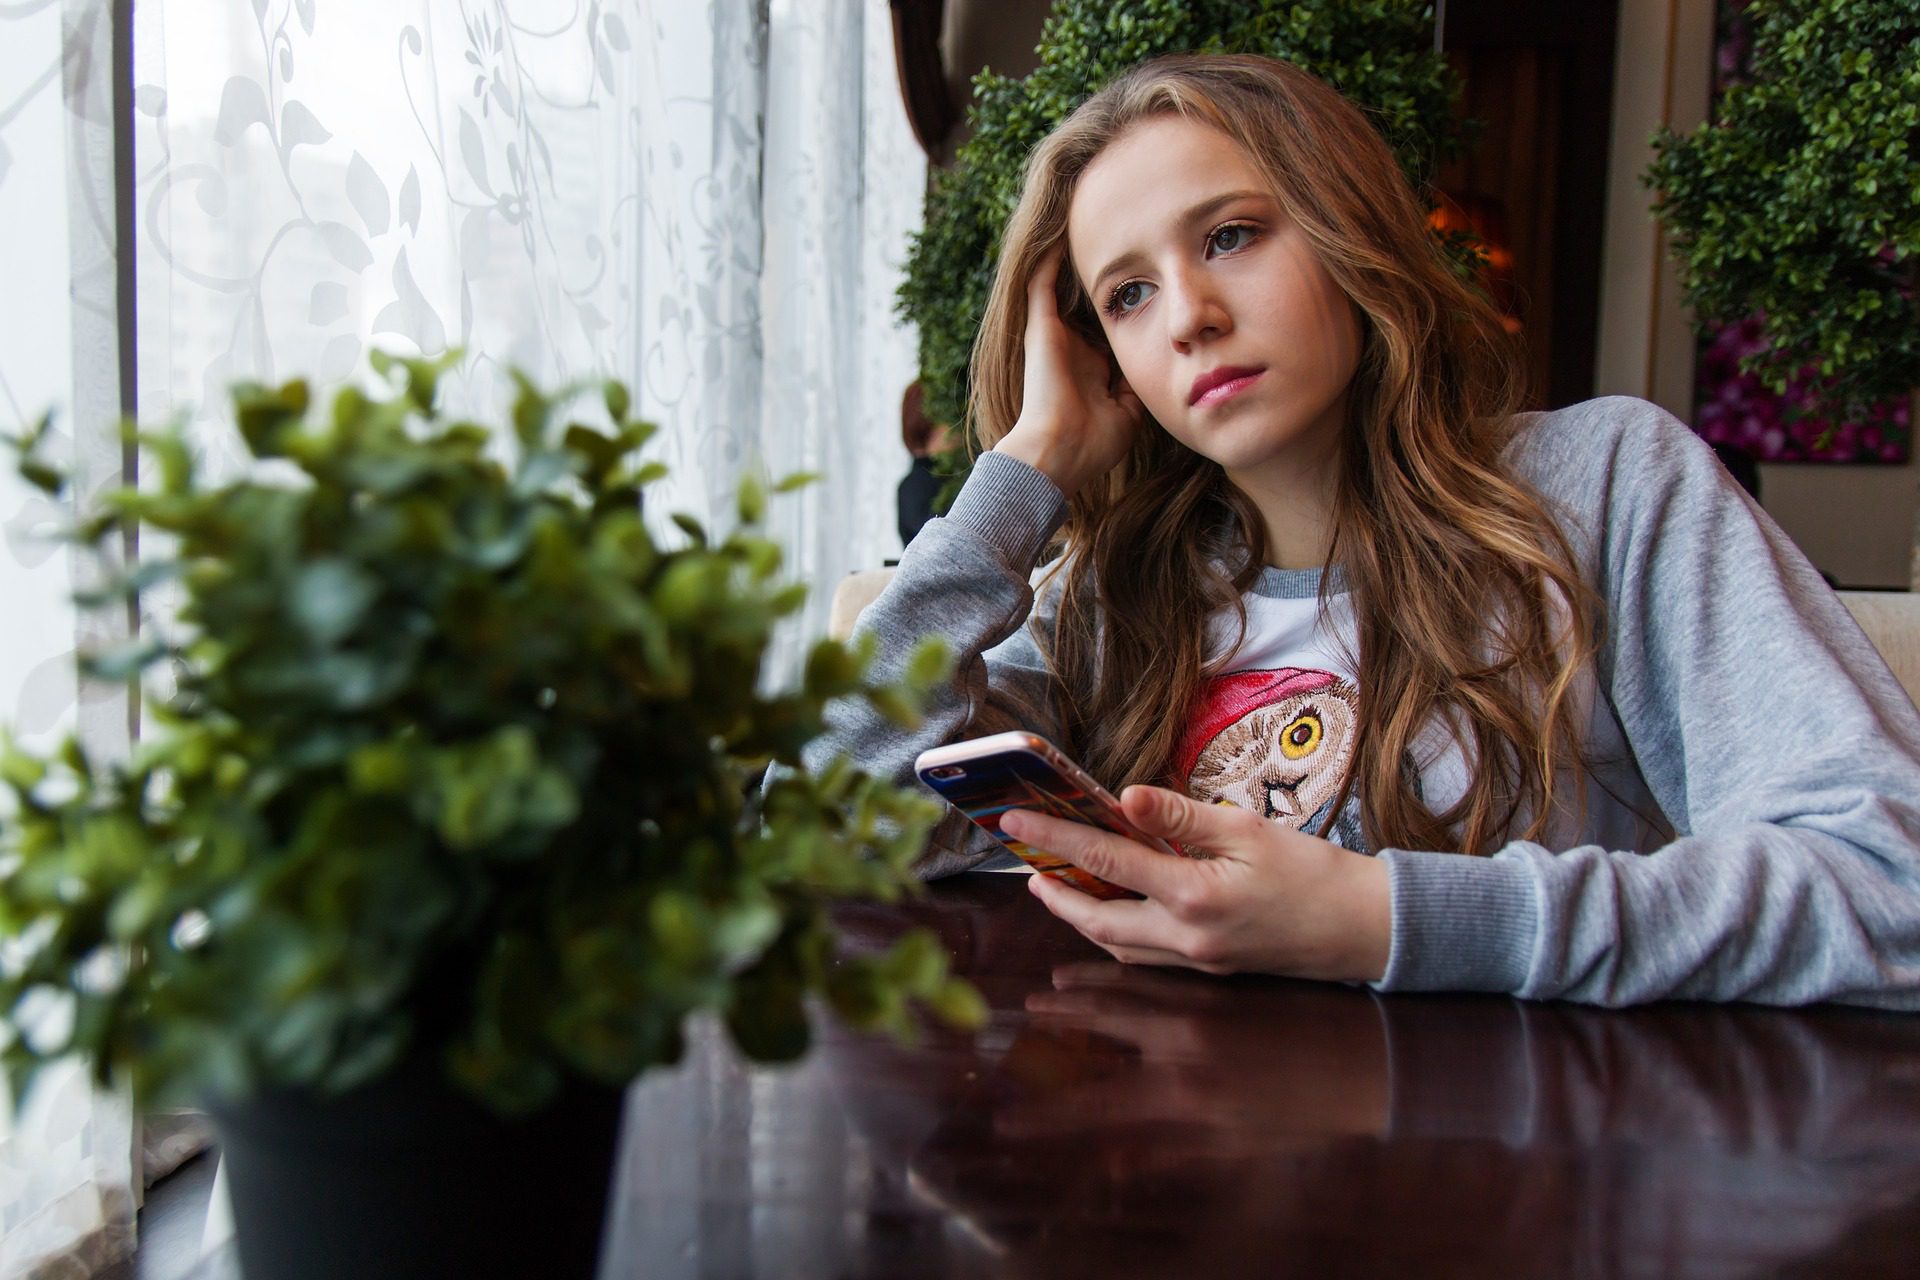 Sad girl sitting at a table holding her phone